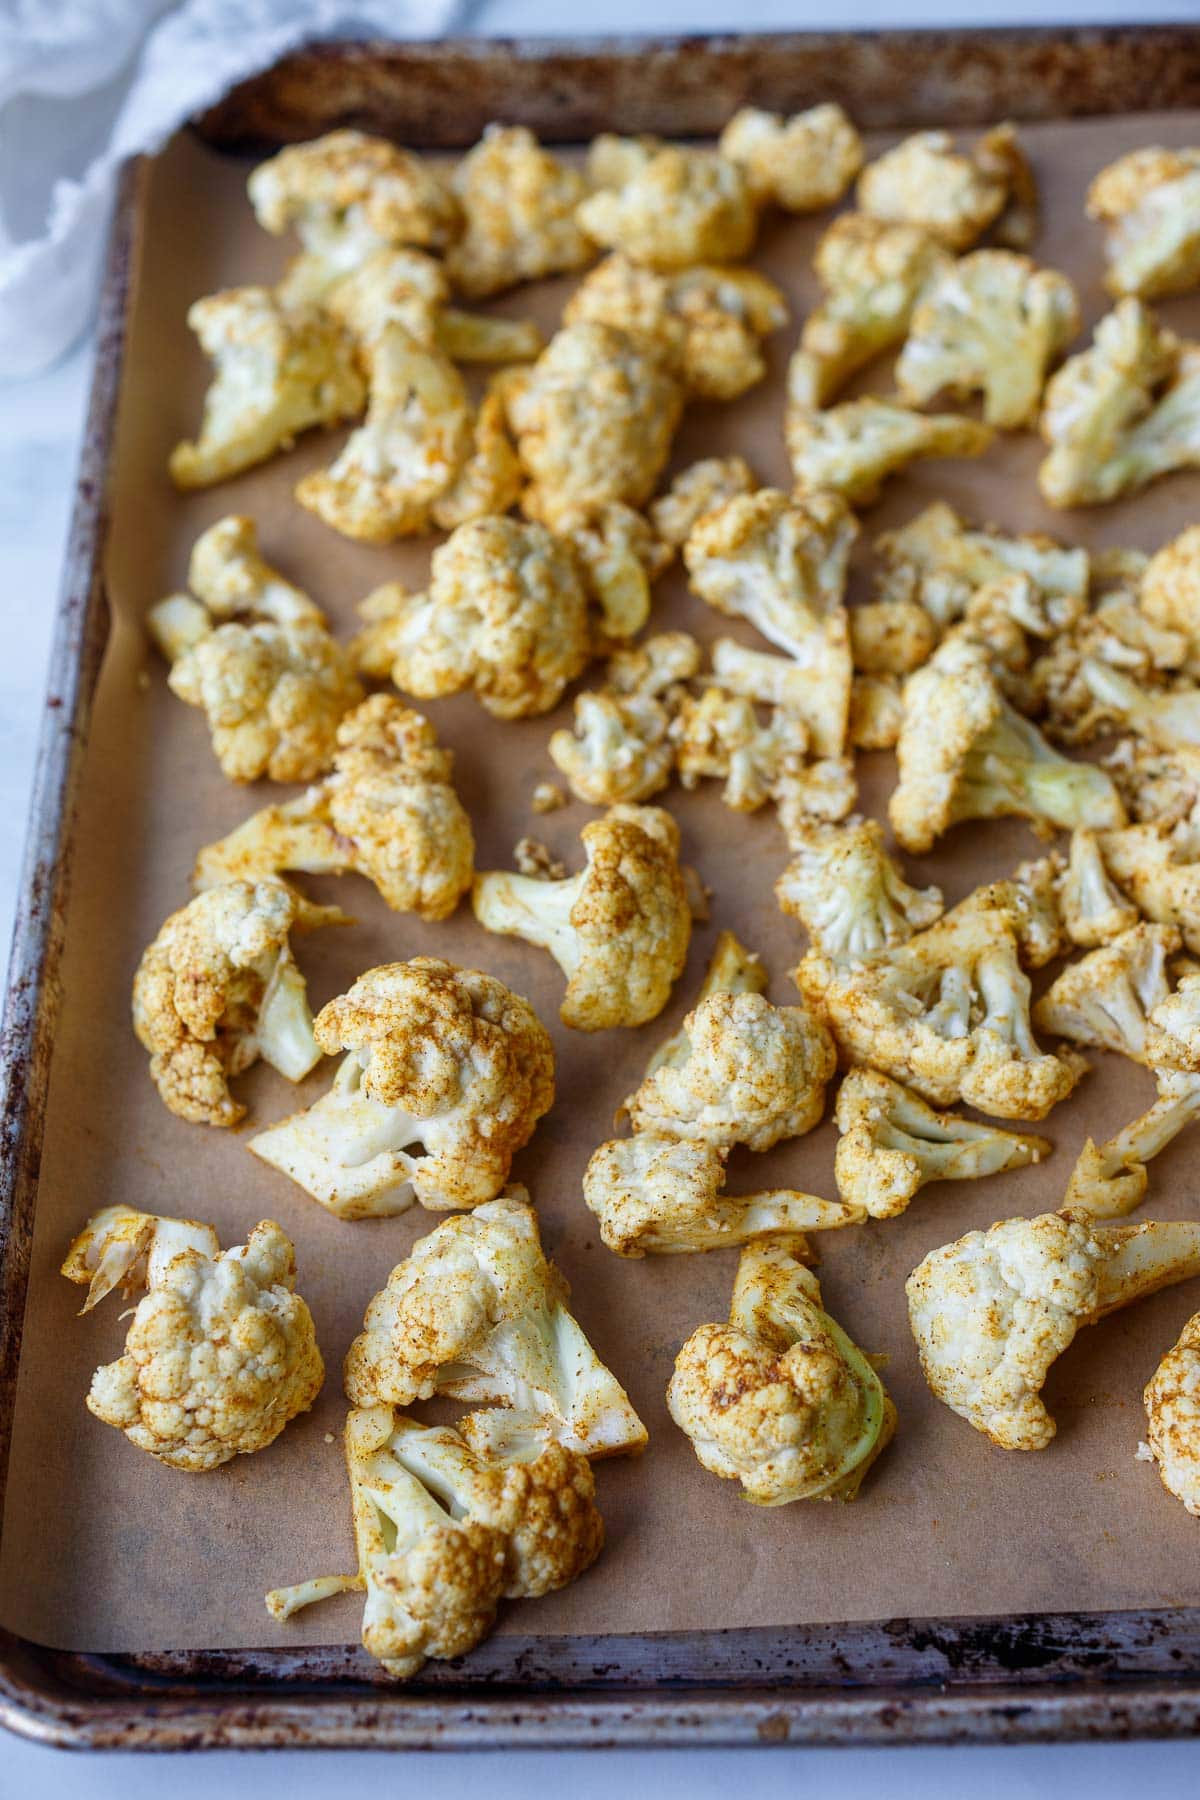 cauliflower florets on parchment-lined baking sheet seasoned with shawarma spice blend.